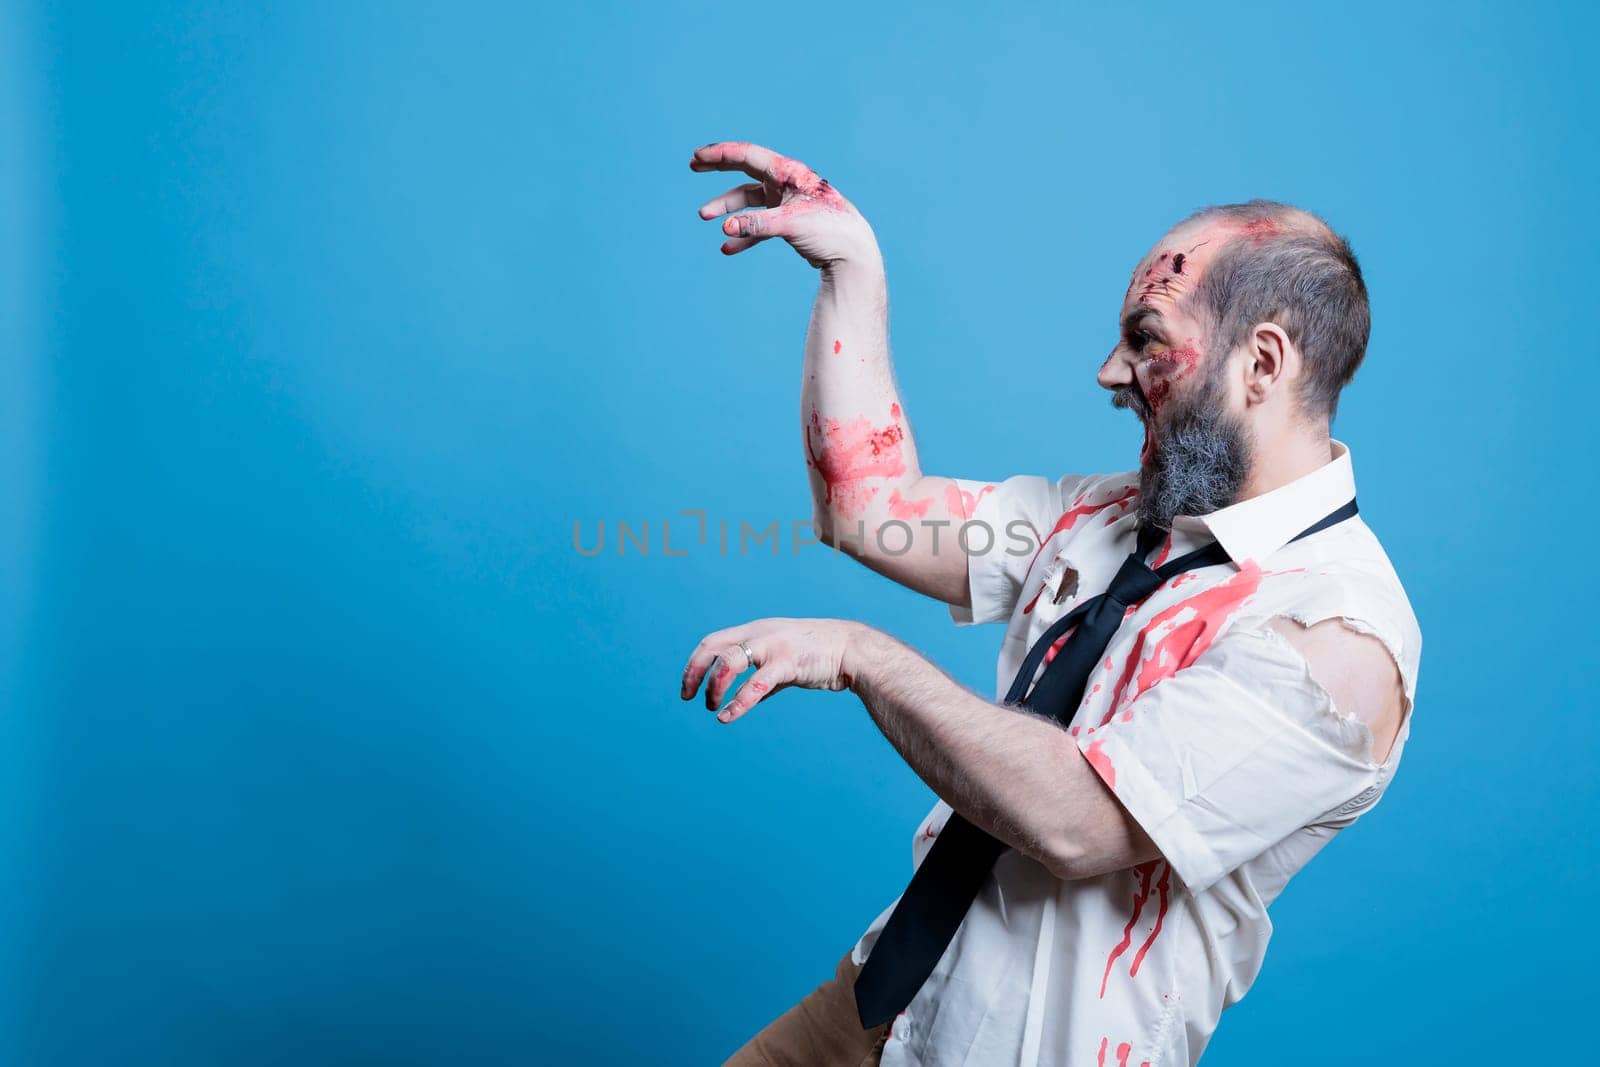 Walking dead cadaver searching for flesh to consume, studio background by DCStudio